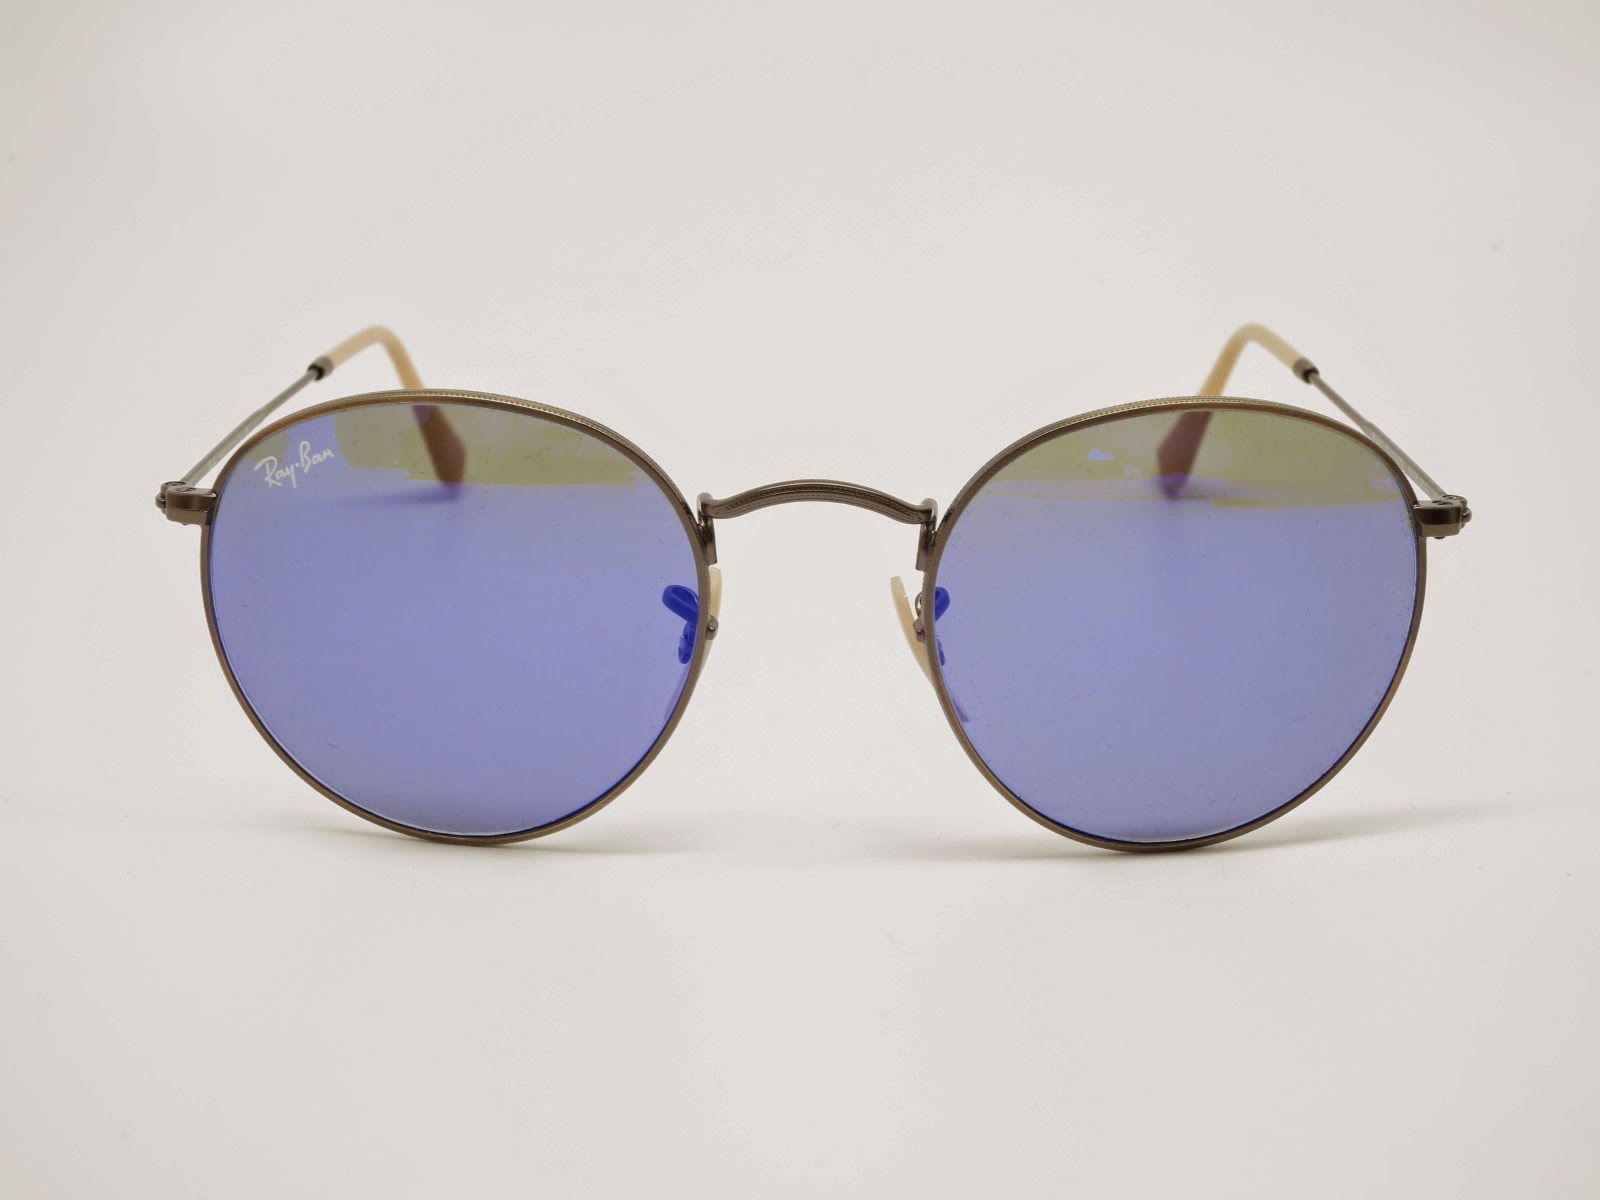 Ray-Ban RB 3447 Round Metal 167/68 Blue Mirrored Sunglasses | I Love ...